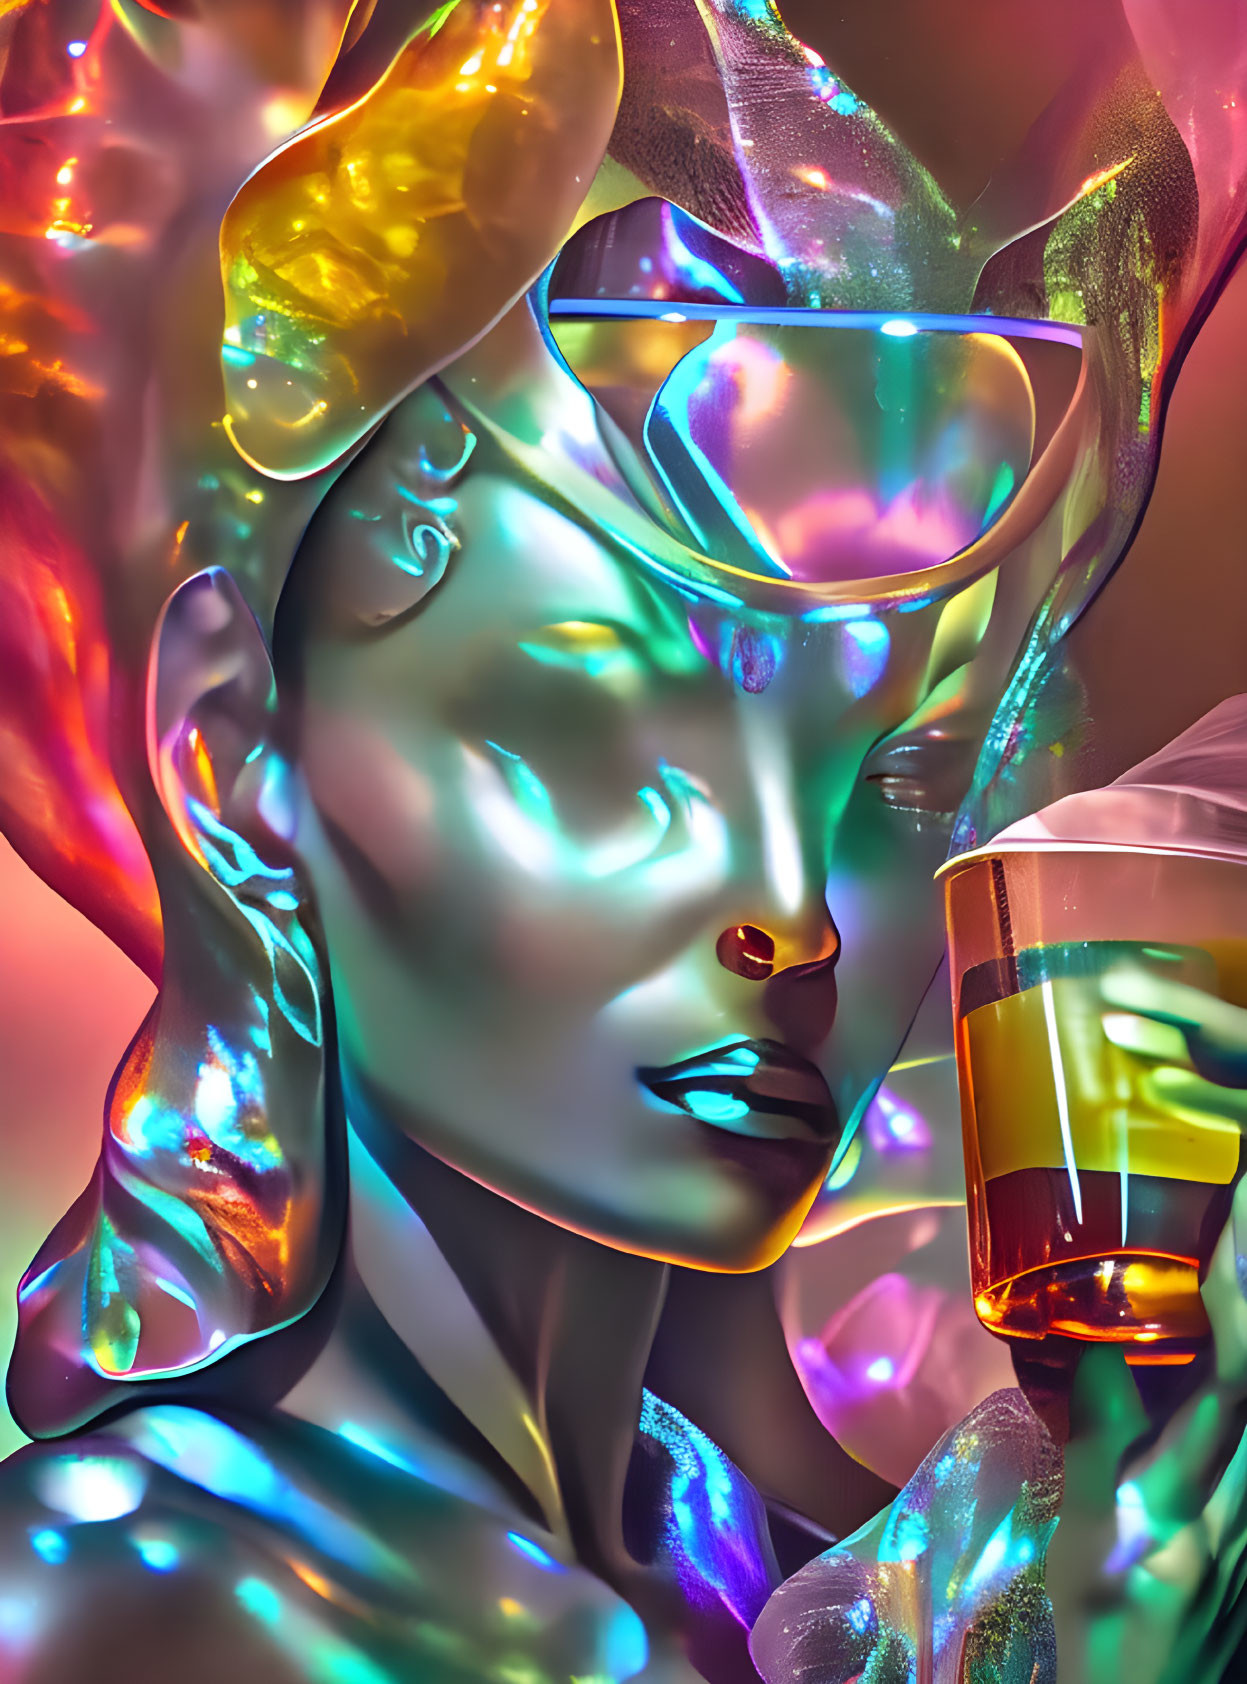 Colorful Metallic Mannequin Head with Sunglasses and Glass of Liquid